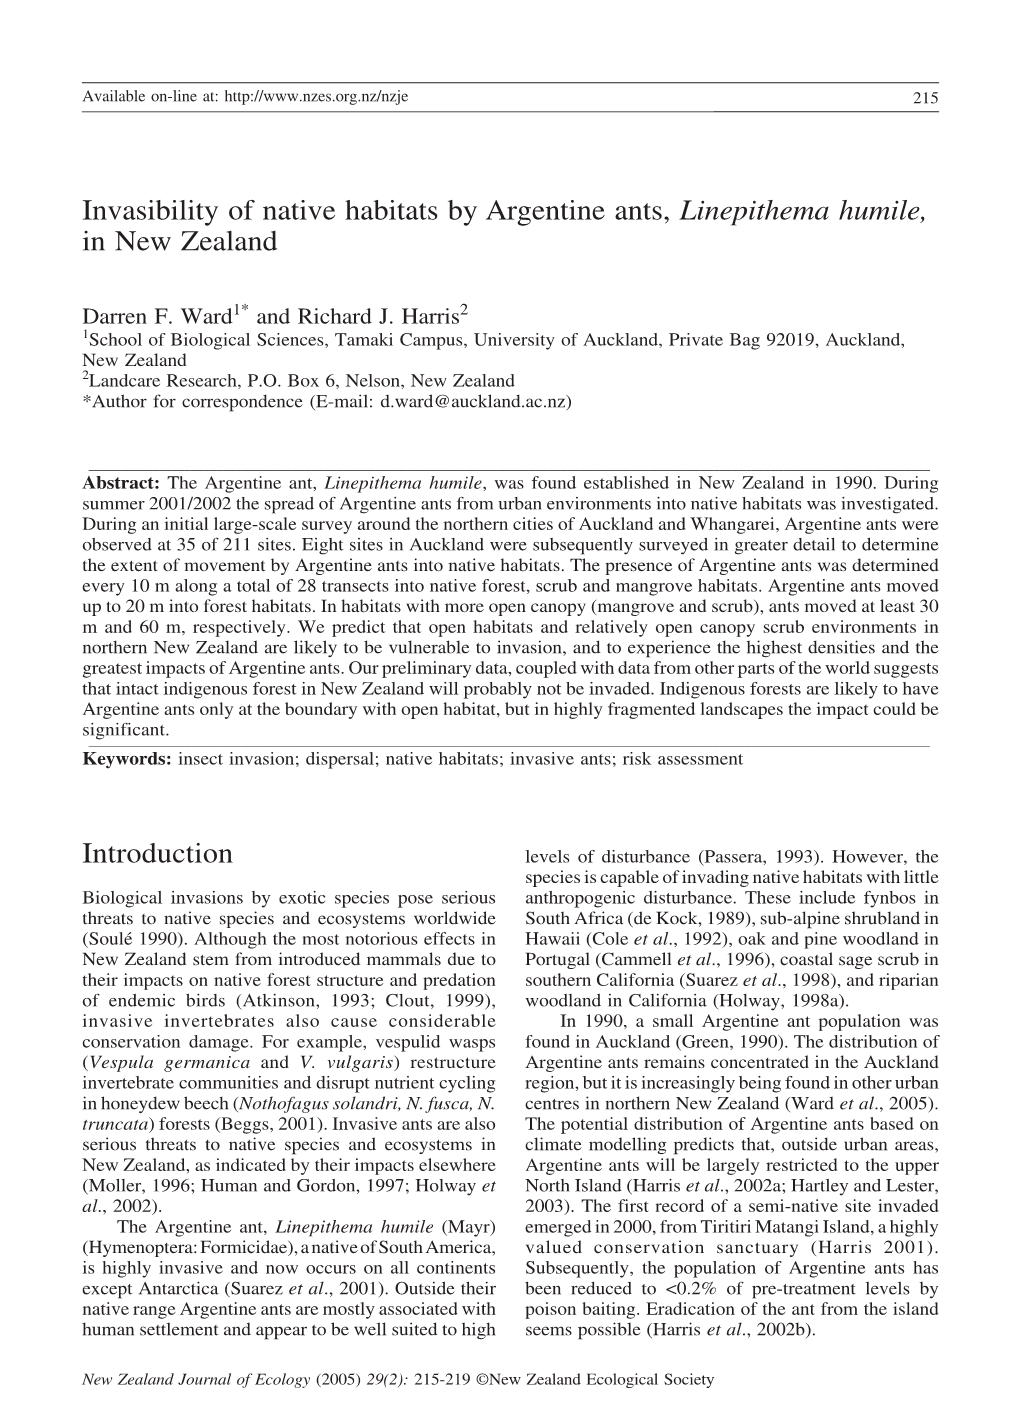 Invasibility of Native Habitats by Argentine Ants, Linepithema Humile, in New Zealand